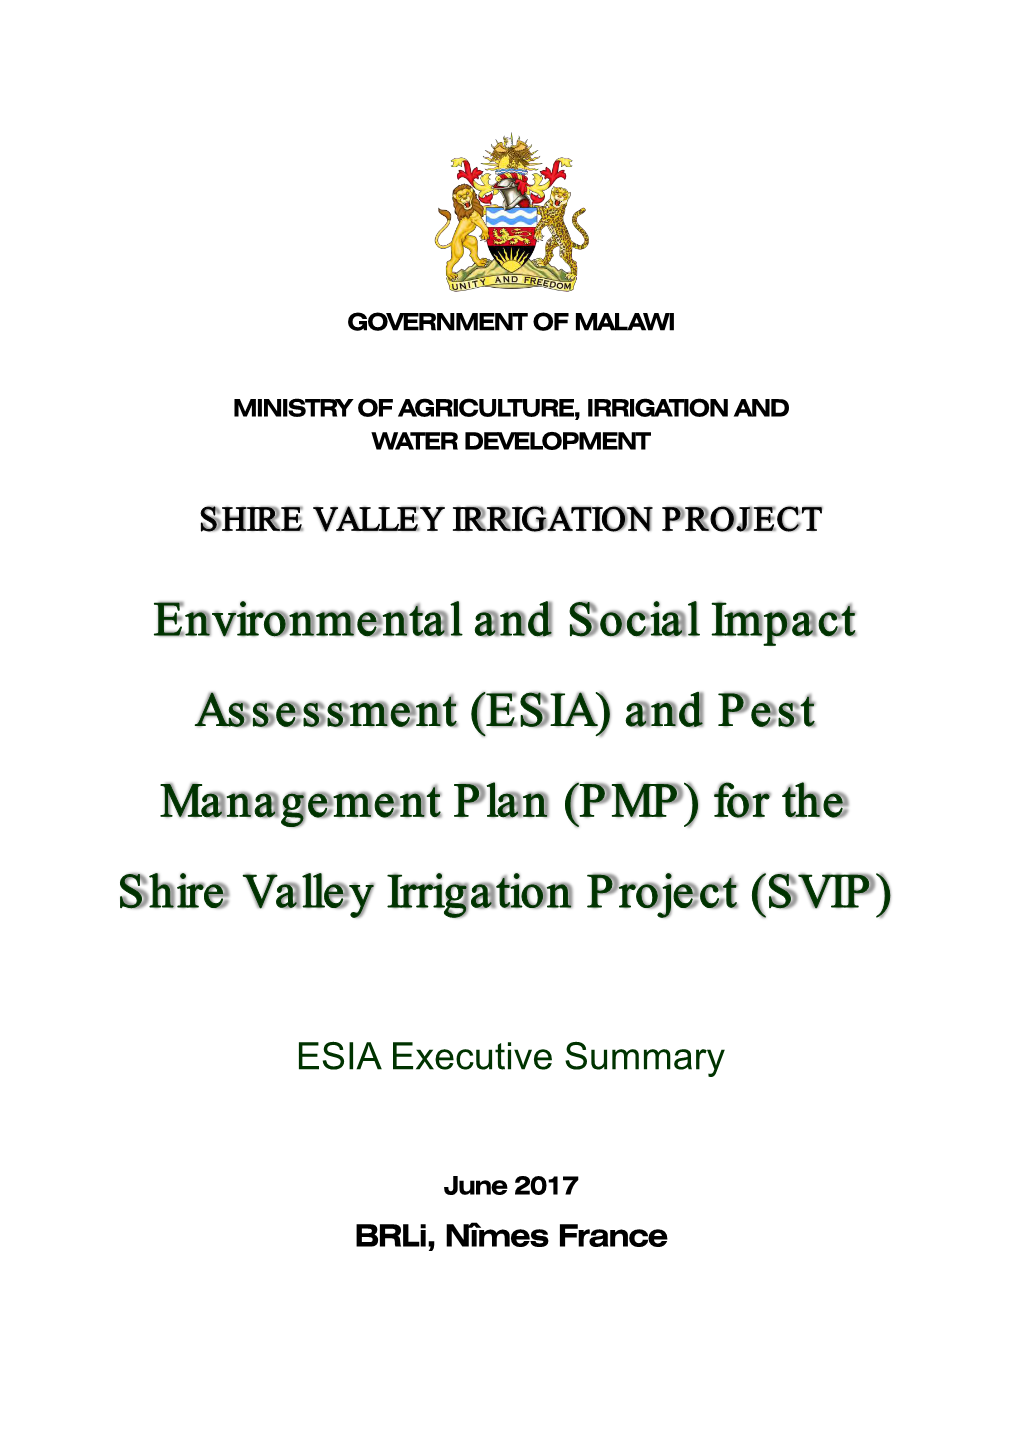 For the Shire Valley Irrigation Project (SVIP)